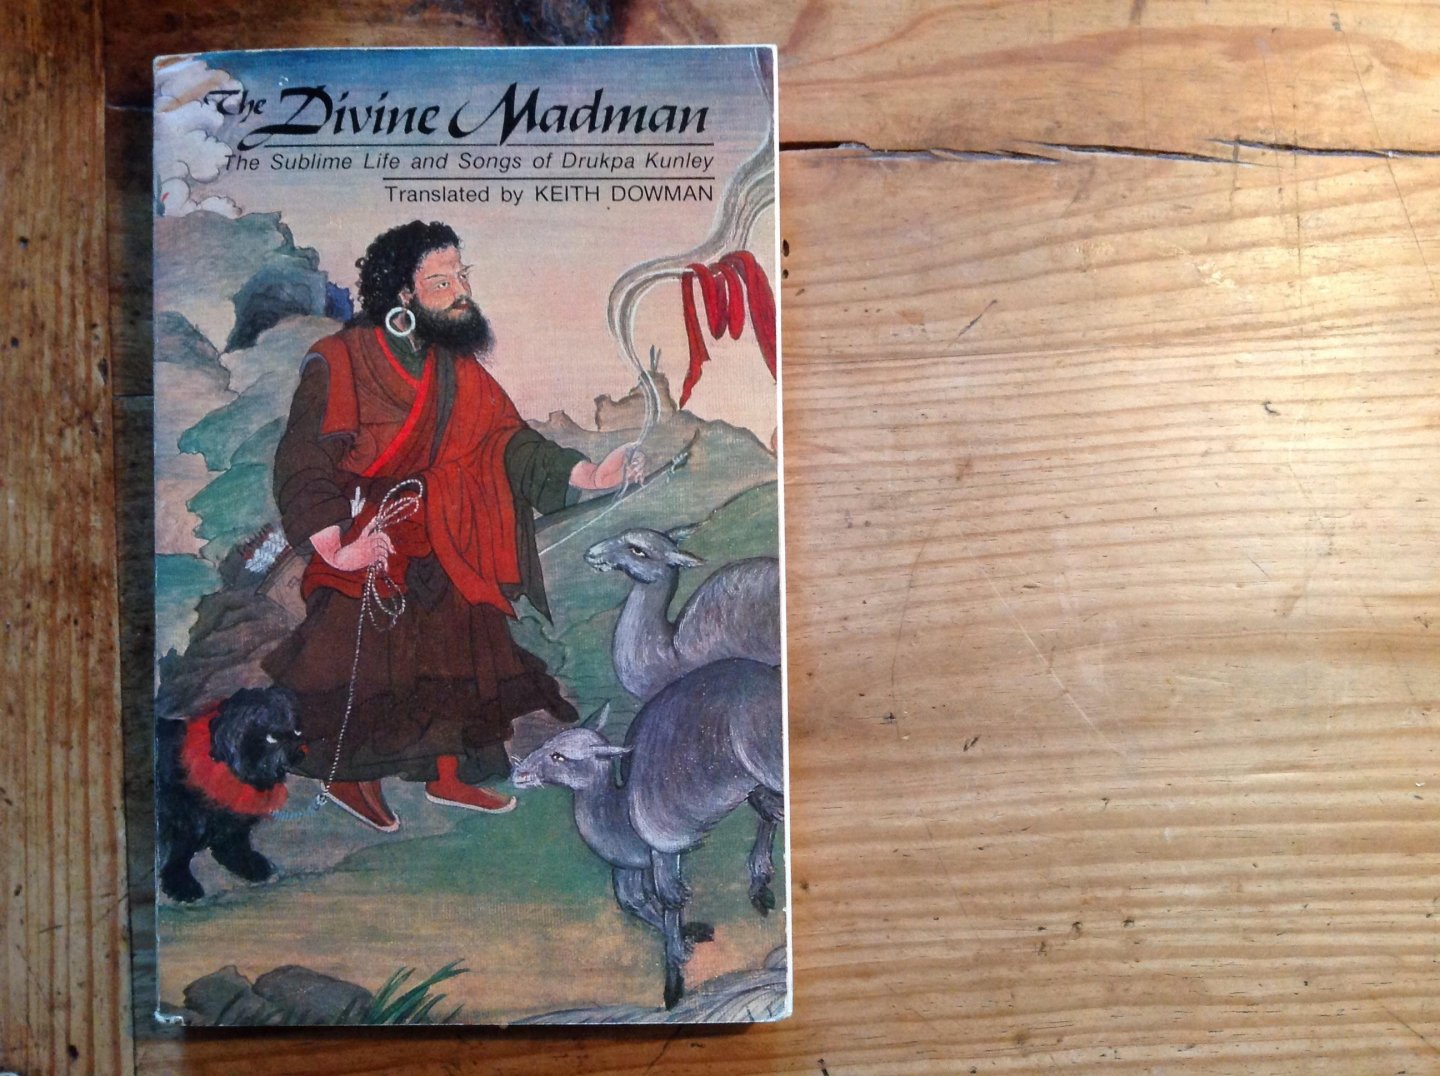 Keith Dowman - The divine madman, the sublime songs of Drukpa Kunley